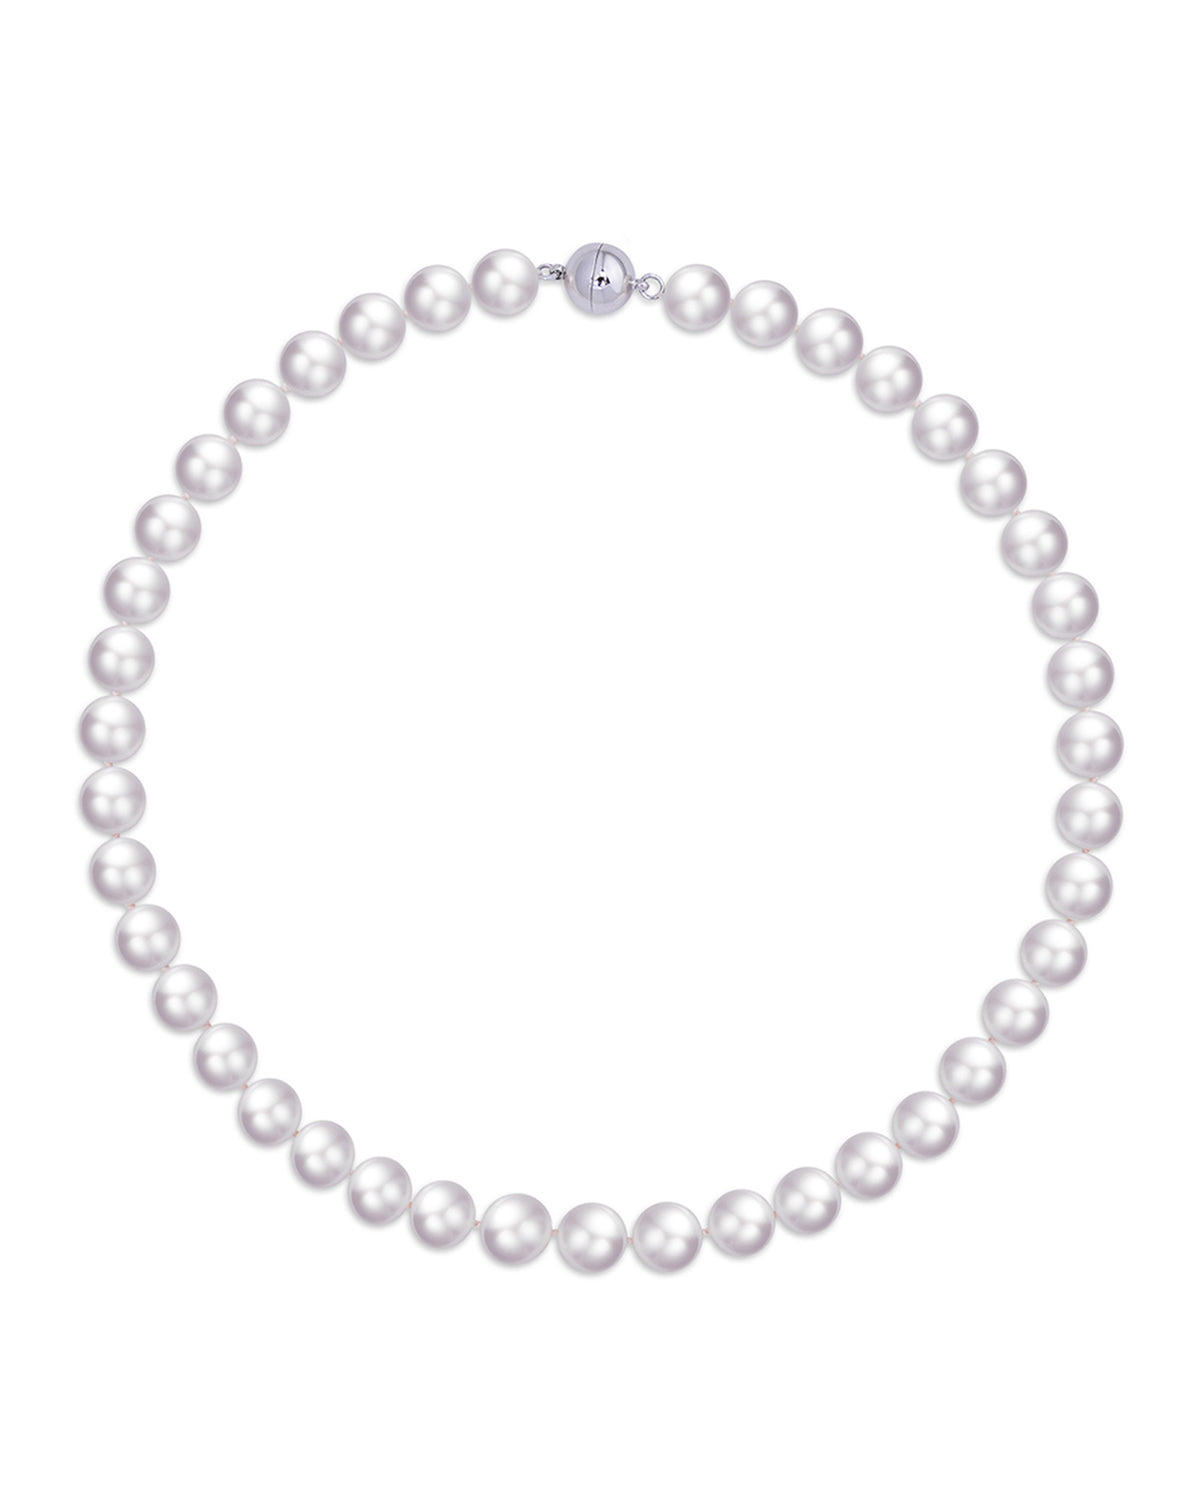 10-11mm White Freshwater Round Pearl Necklace - AAA Quality